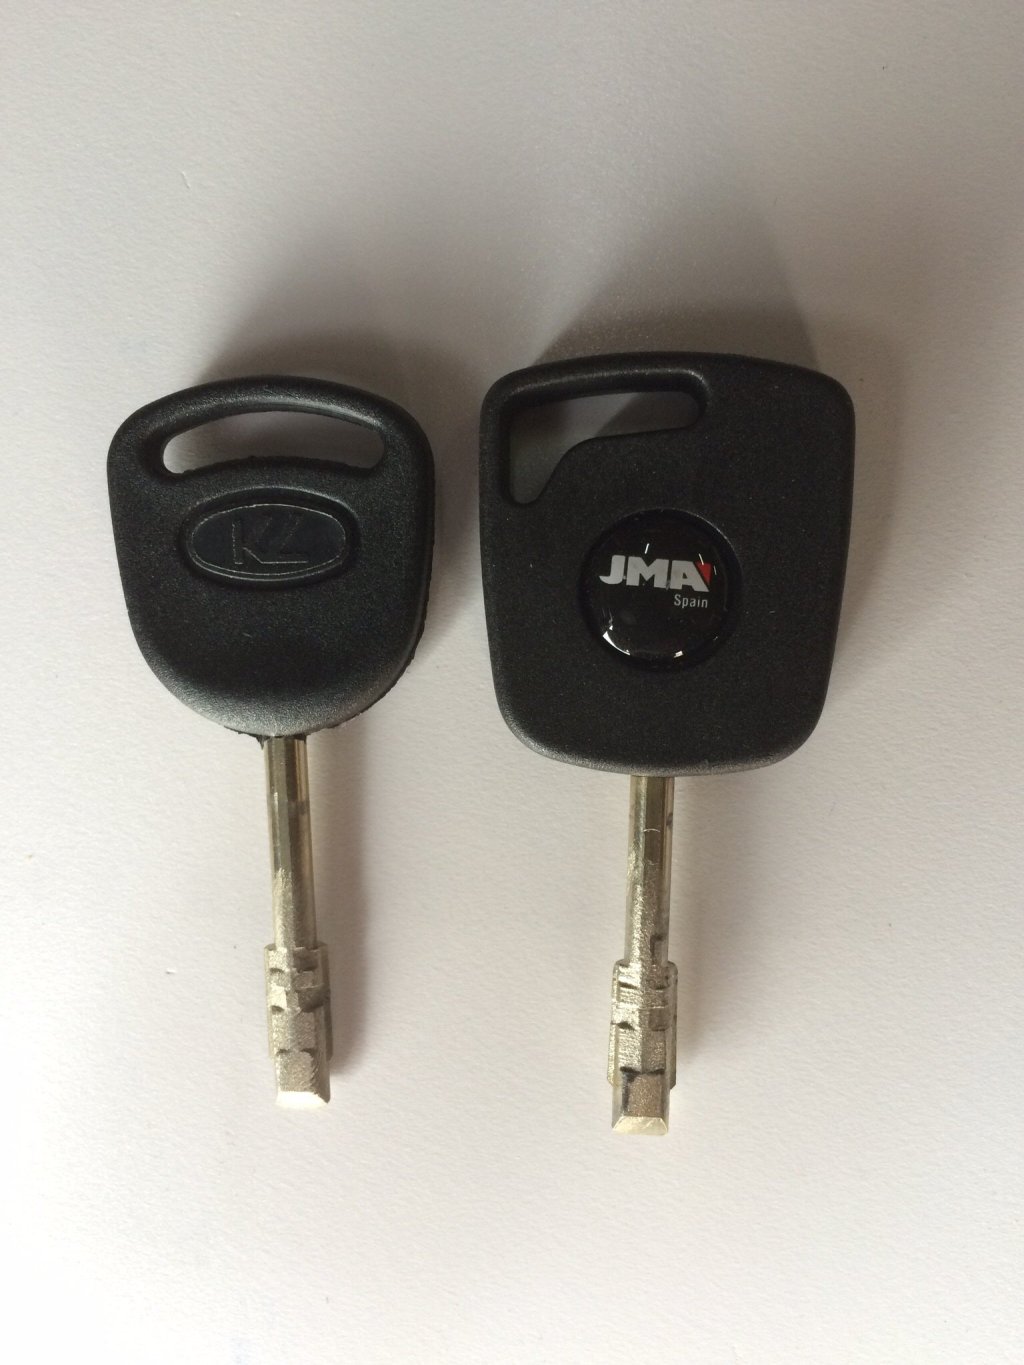 Replacement Ford Transit Key in Whaplode.